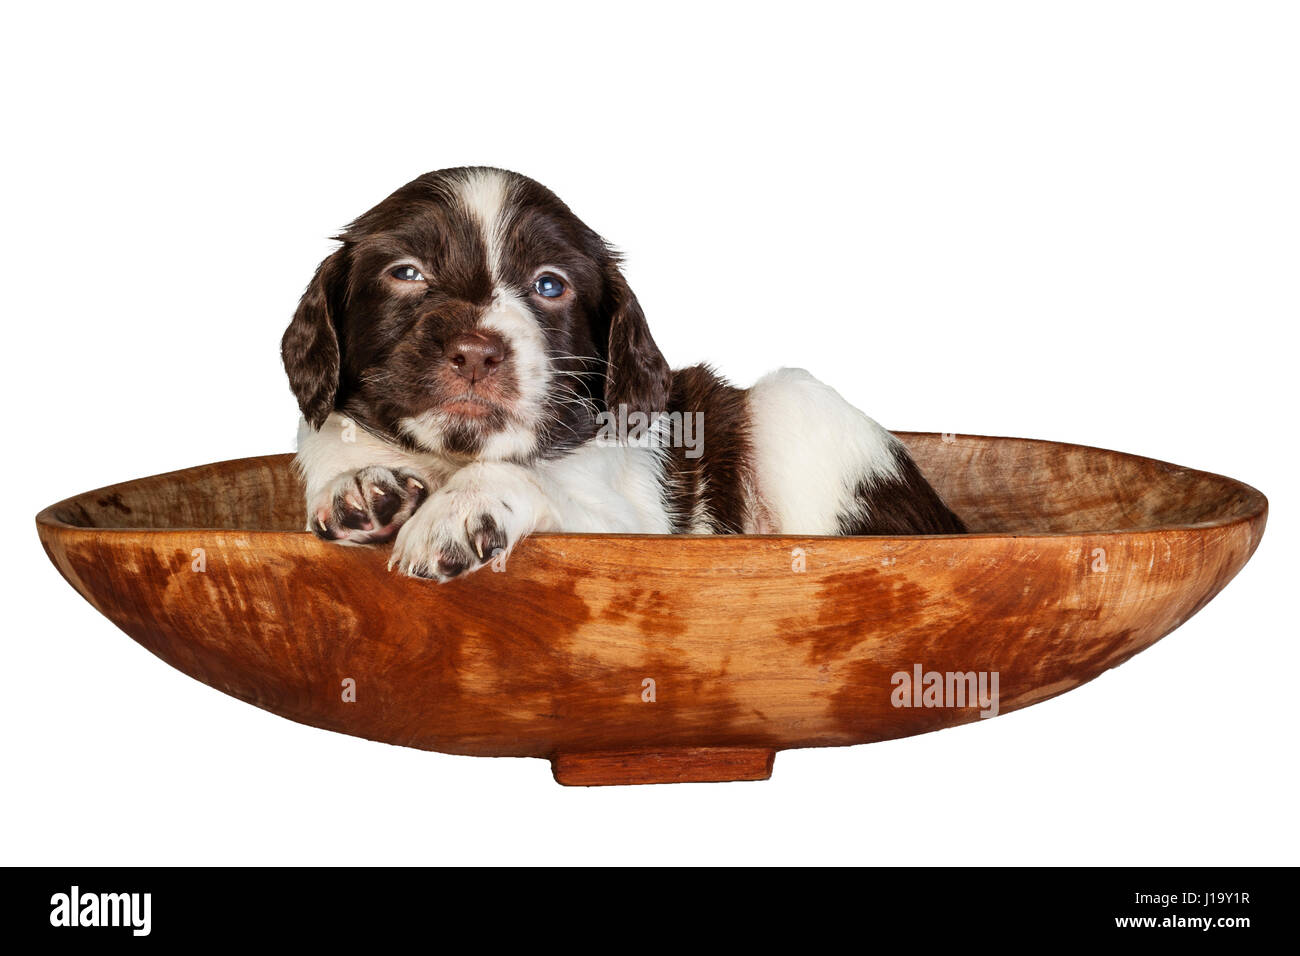 A 4 week old liver and white English Springer Spaniel puppy in a basket Stock Photo